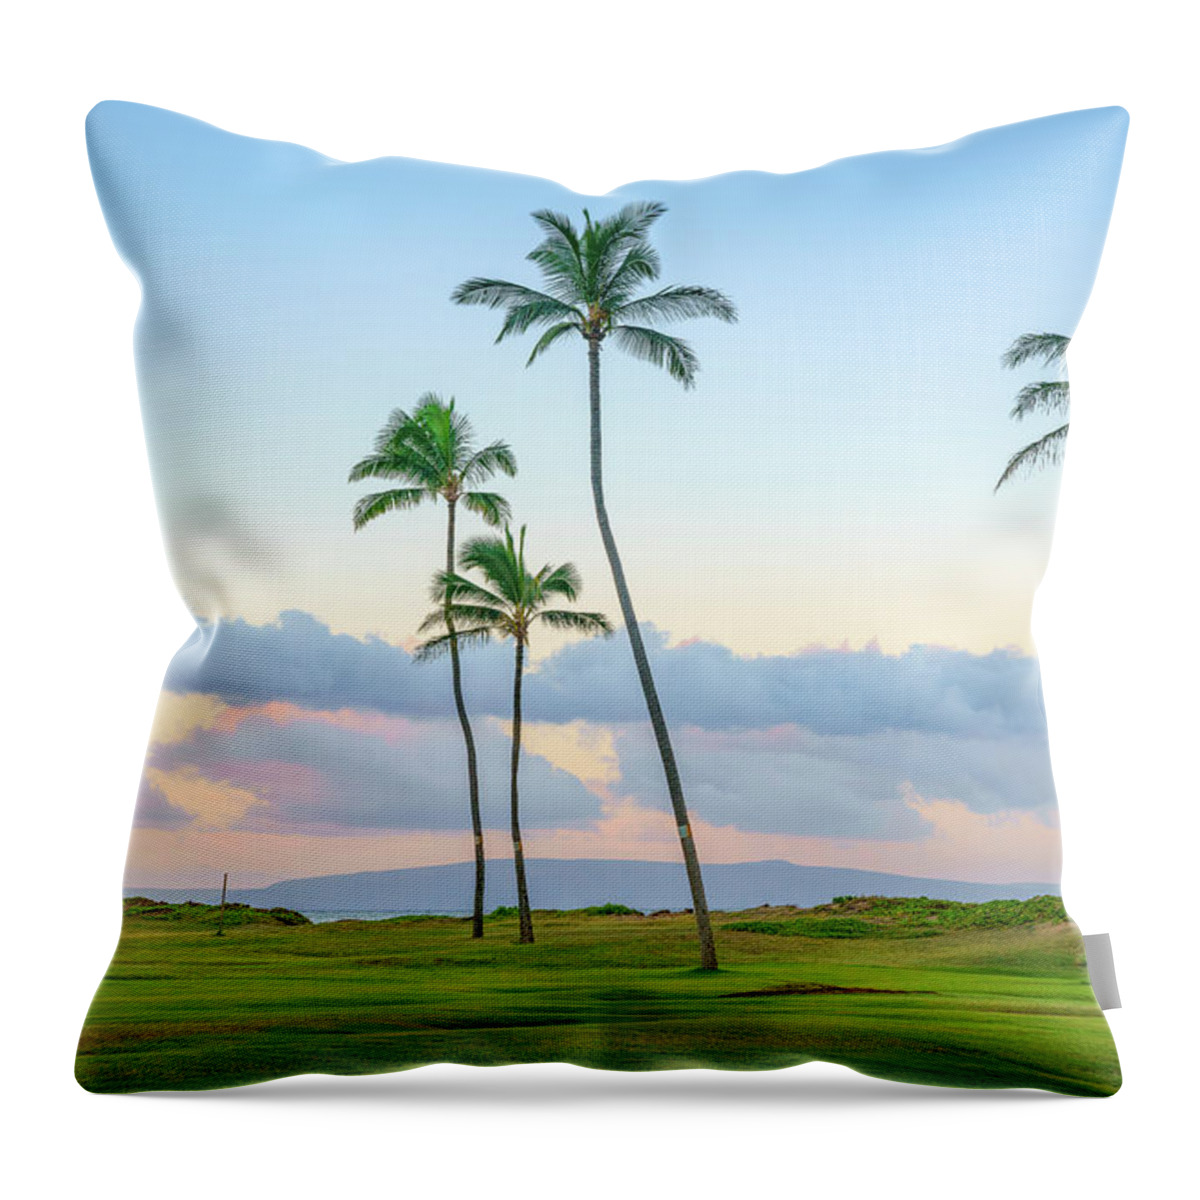 Beautiful Throw Pillow featuring the photograph 5 Palms by Greg Mitchell Photography